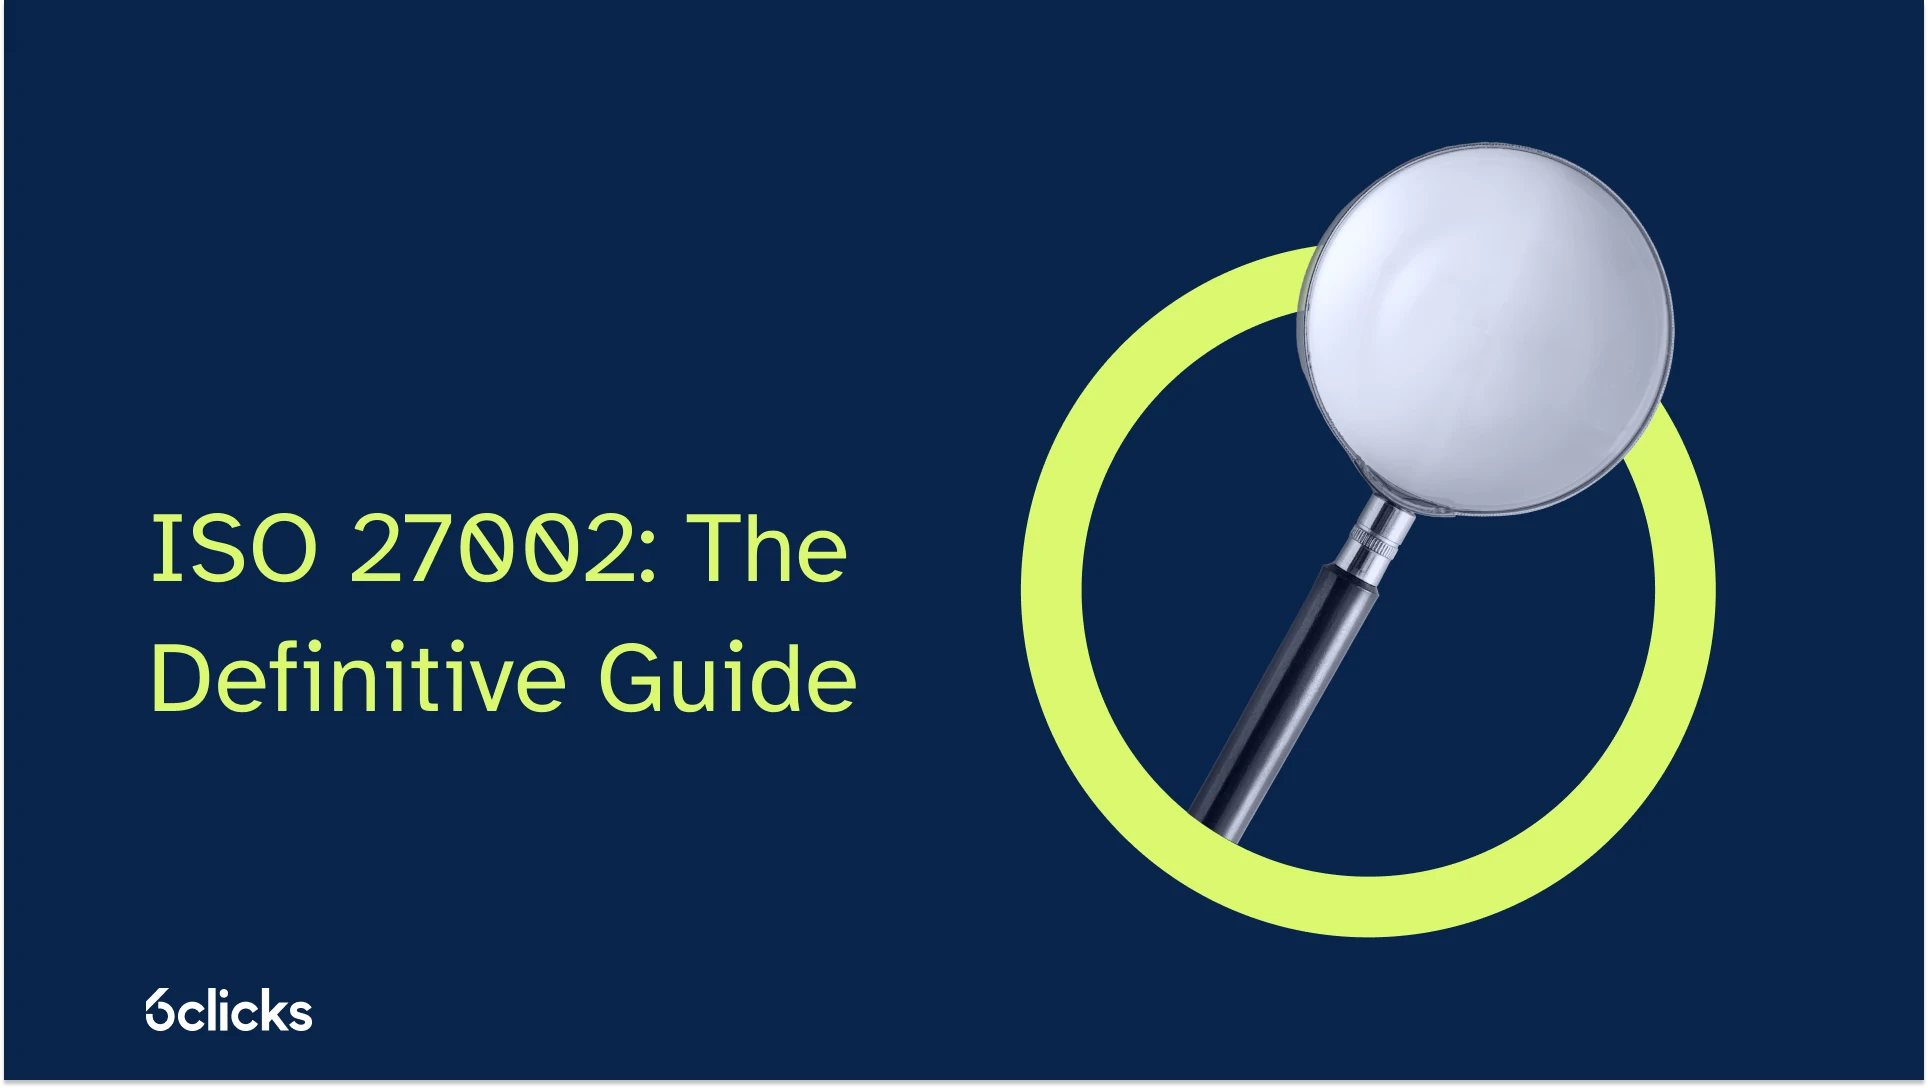 ISO 27002: The Definitive Guide